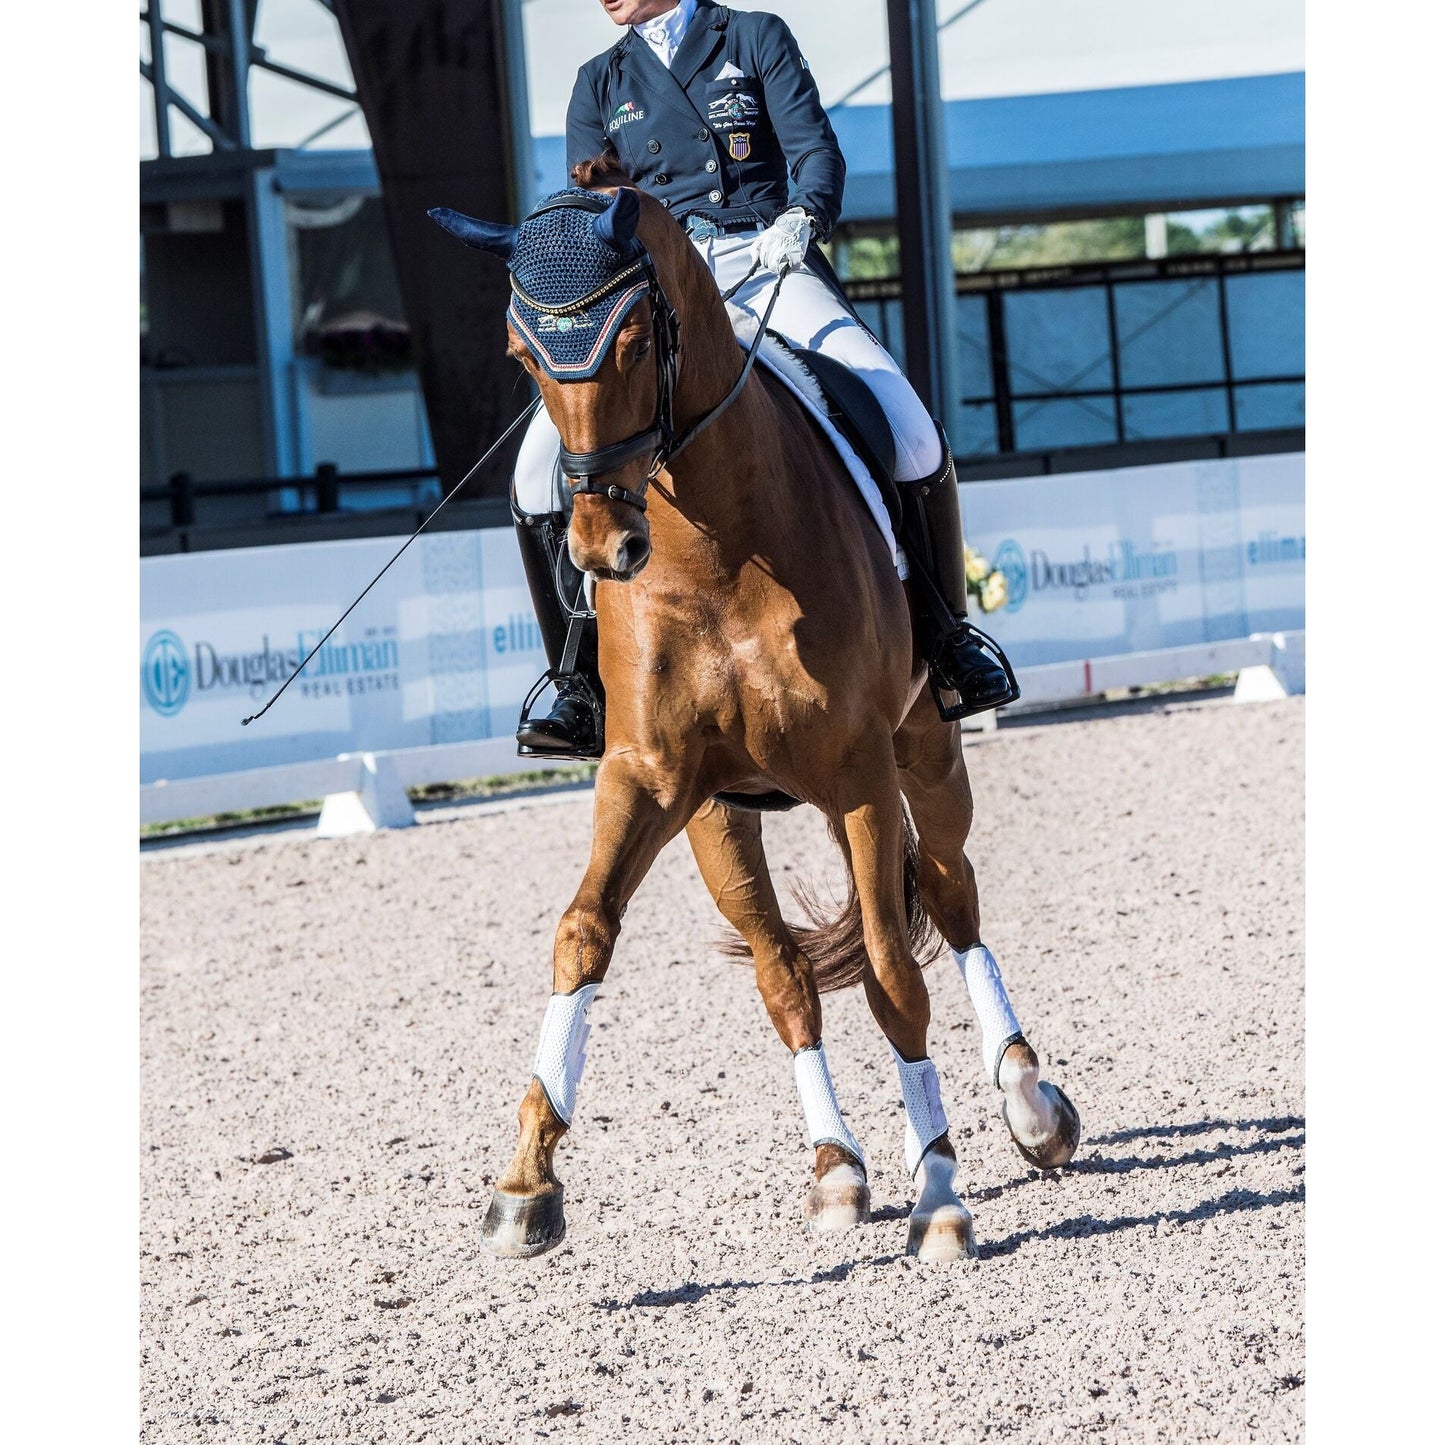 Equestrian in Thinline Global attire riding a brown horse in competition.